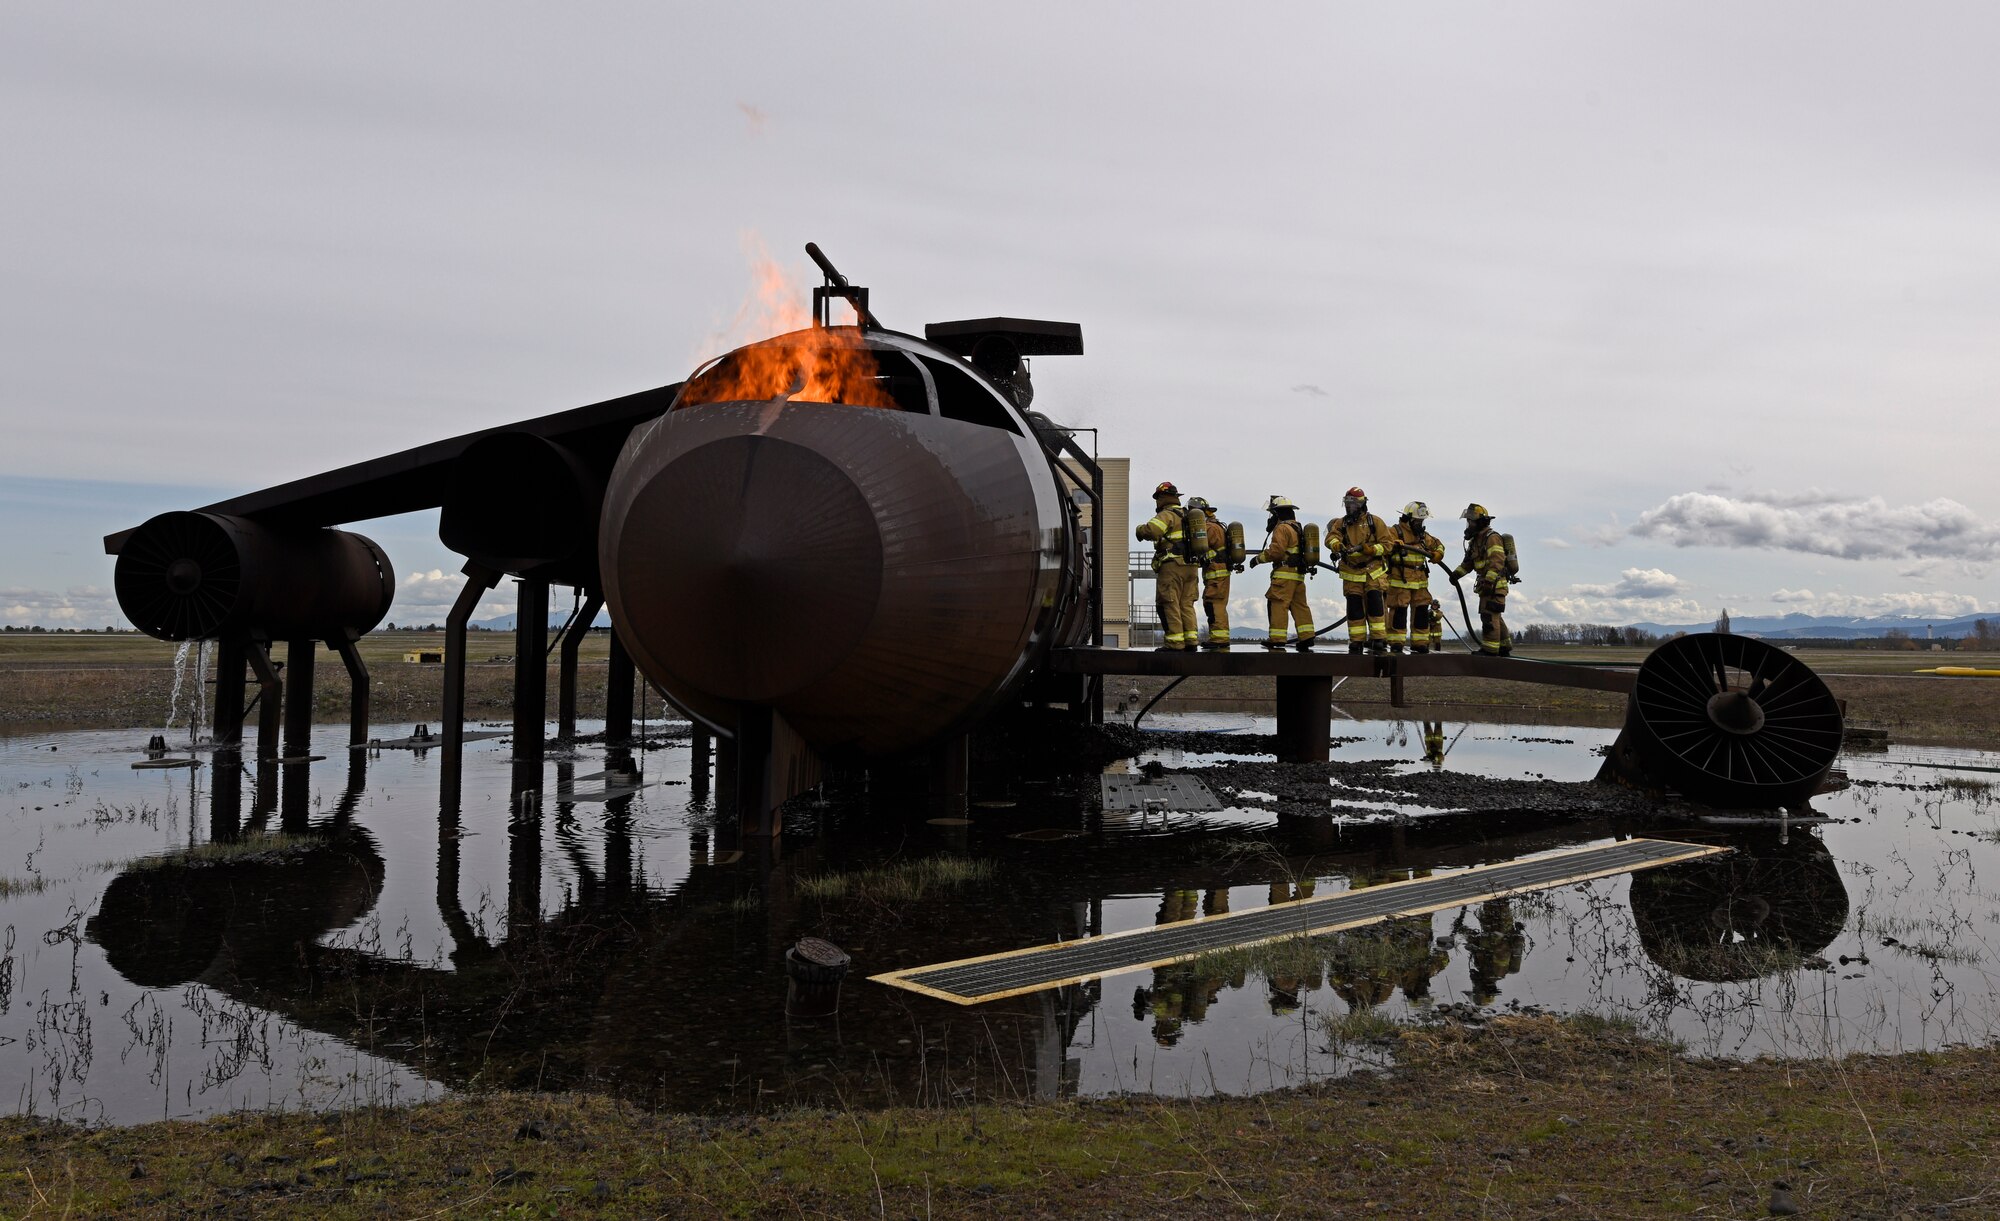 Oregon Air National Guard Airmen from Kingsley Field and civil engineer officers from various locations across the U.S. walk into an aircraft’s interior during a live fire training at Fairchild Air Force Base, Washington, April 18, 2018. The rigorous hands-on training consists of aircraft and structure live-fire scenarios. This gave both groups training in all aspects of firefighting such as emergency mitigation, prevention, communications, health, safety and mutual aid support to their local communities. (U.S. Air Force photo/Airman 1st Class Jesenia Landaverde )